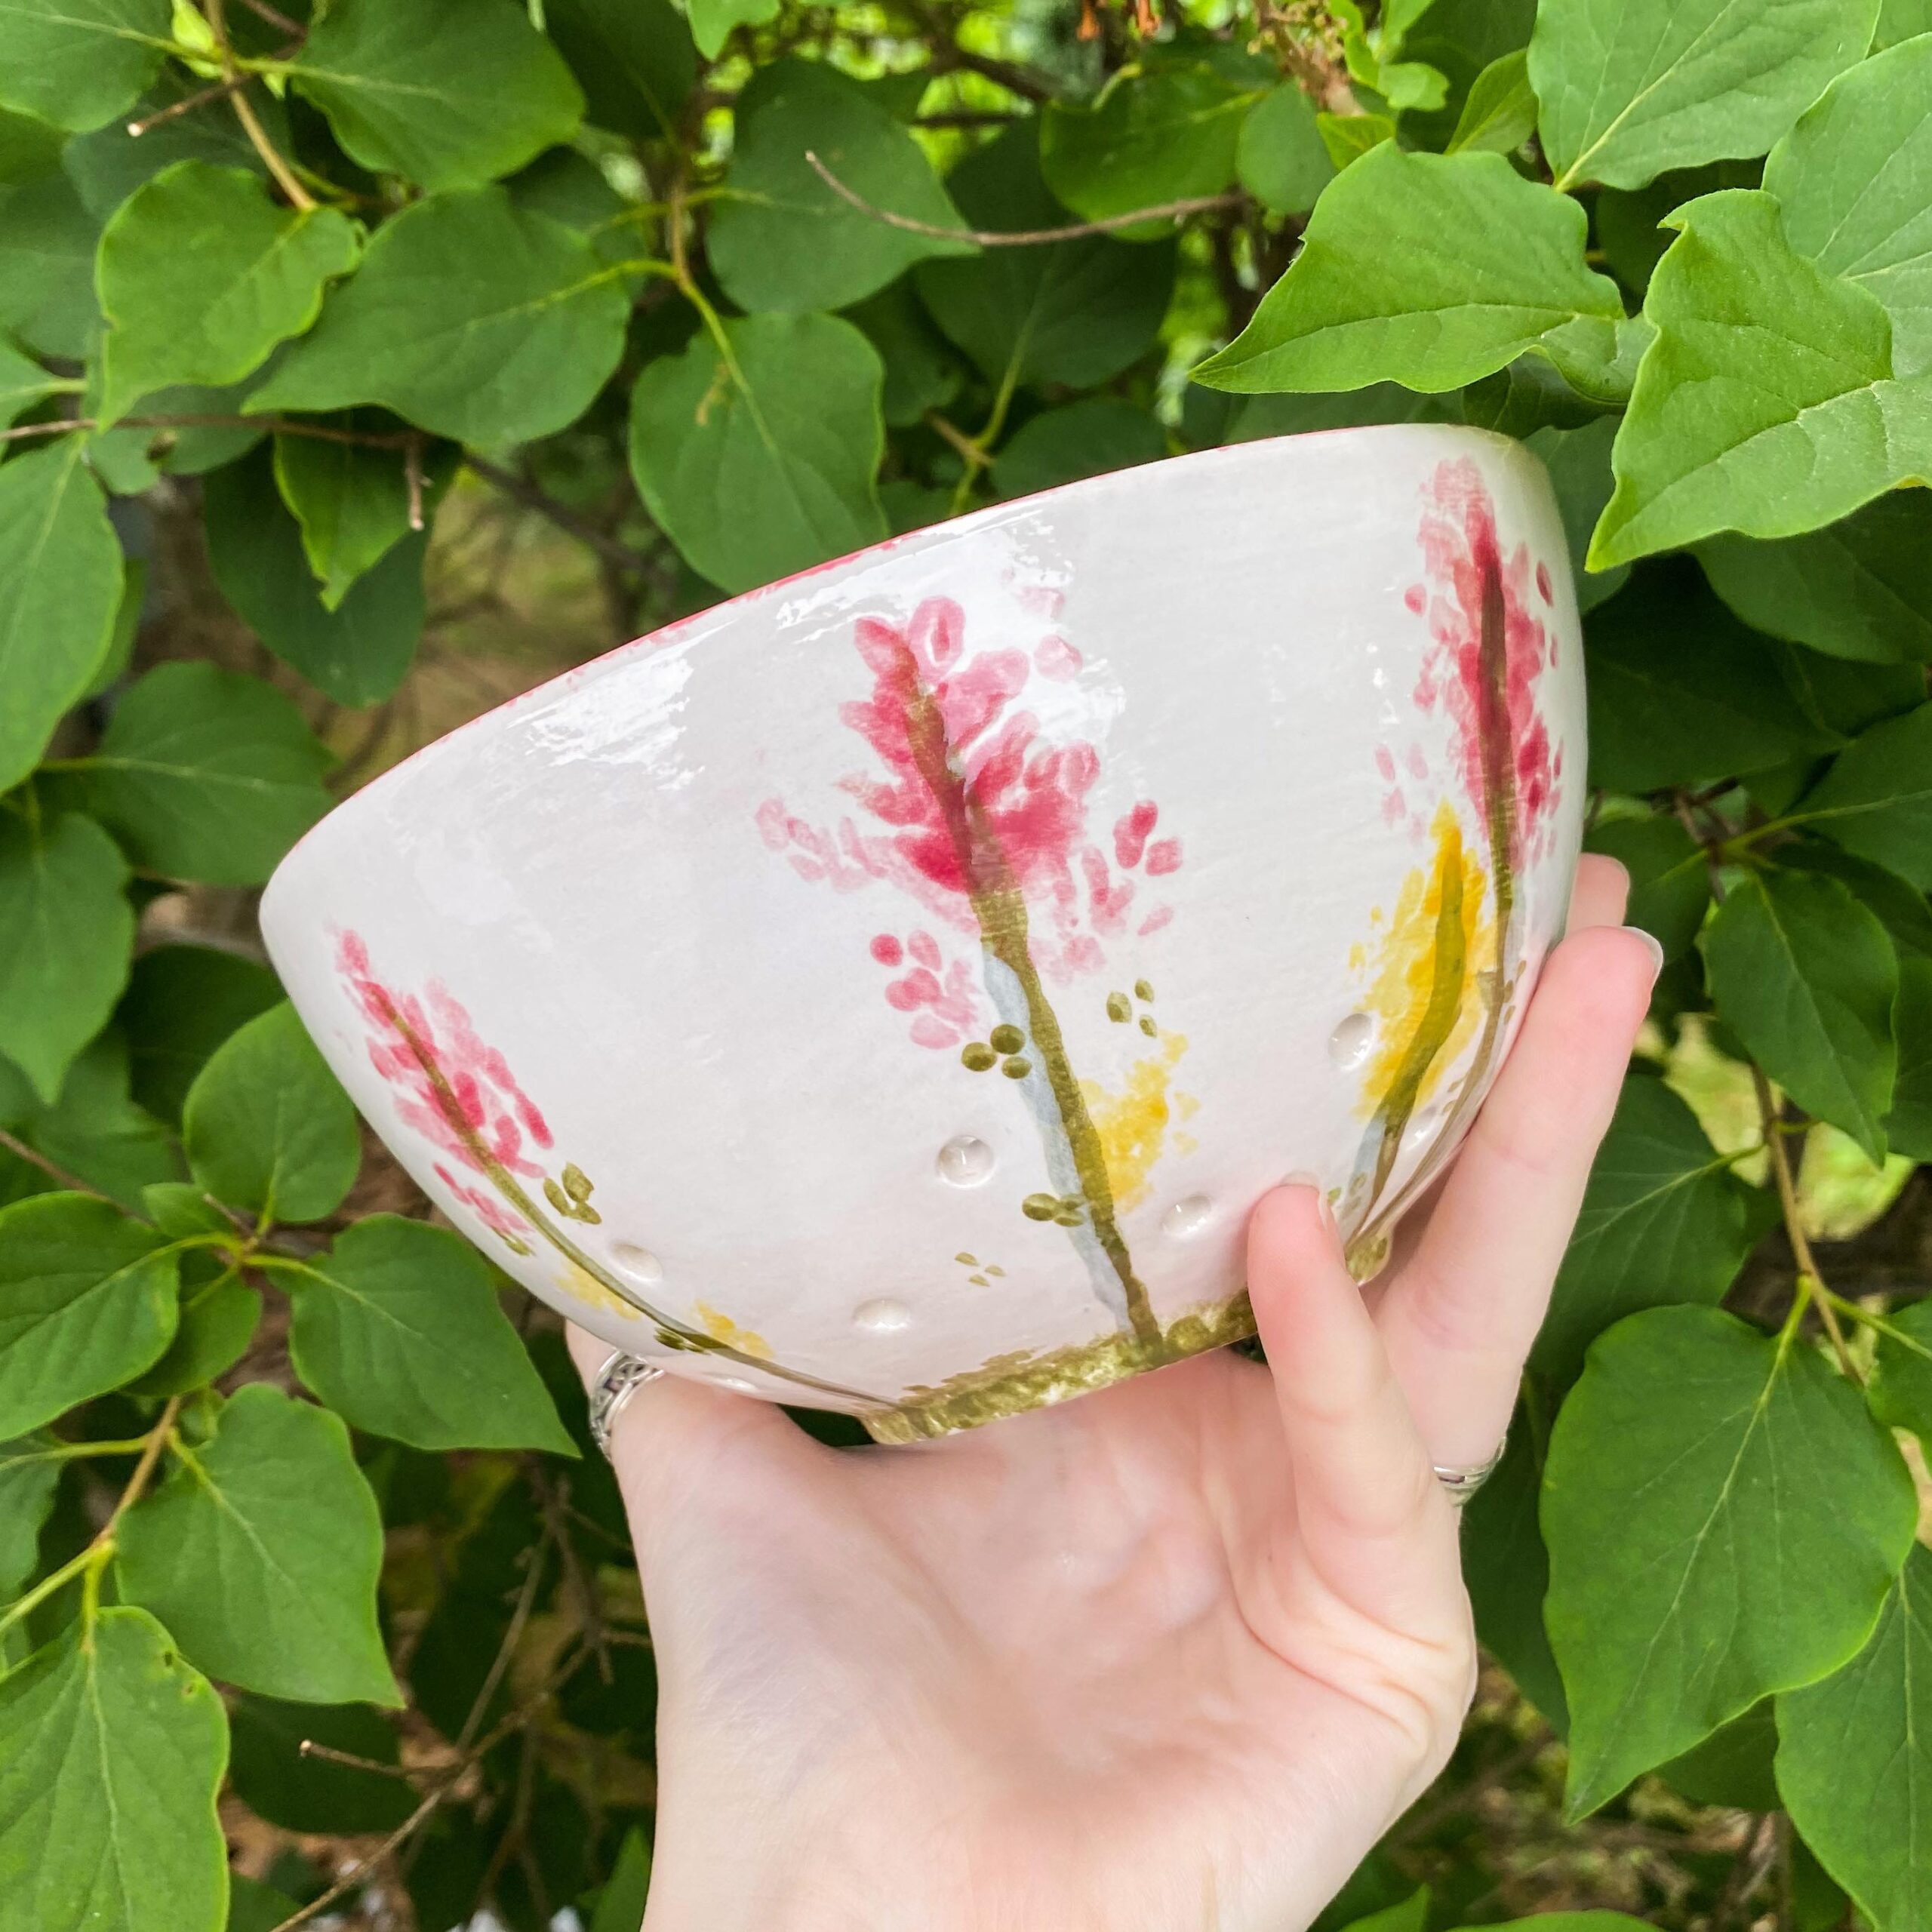 A hand holding a bowl with flowers on it.